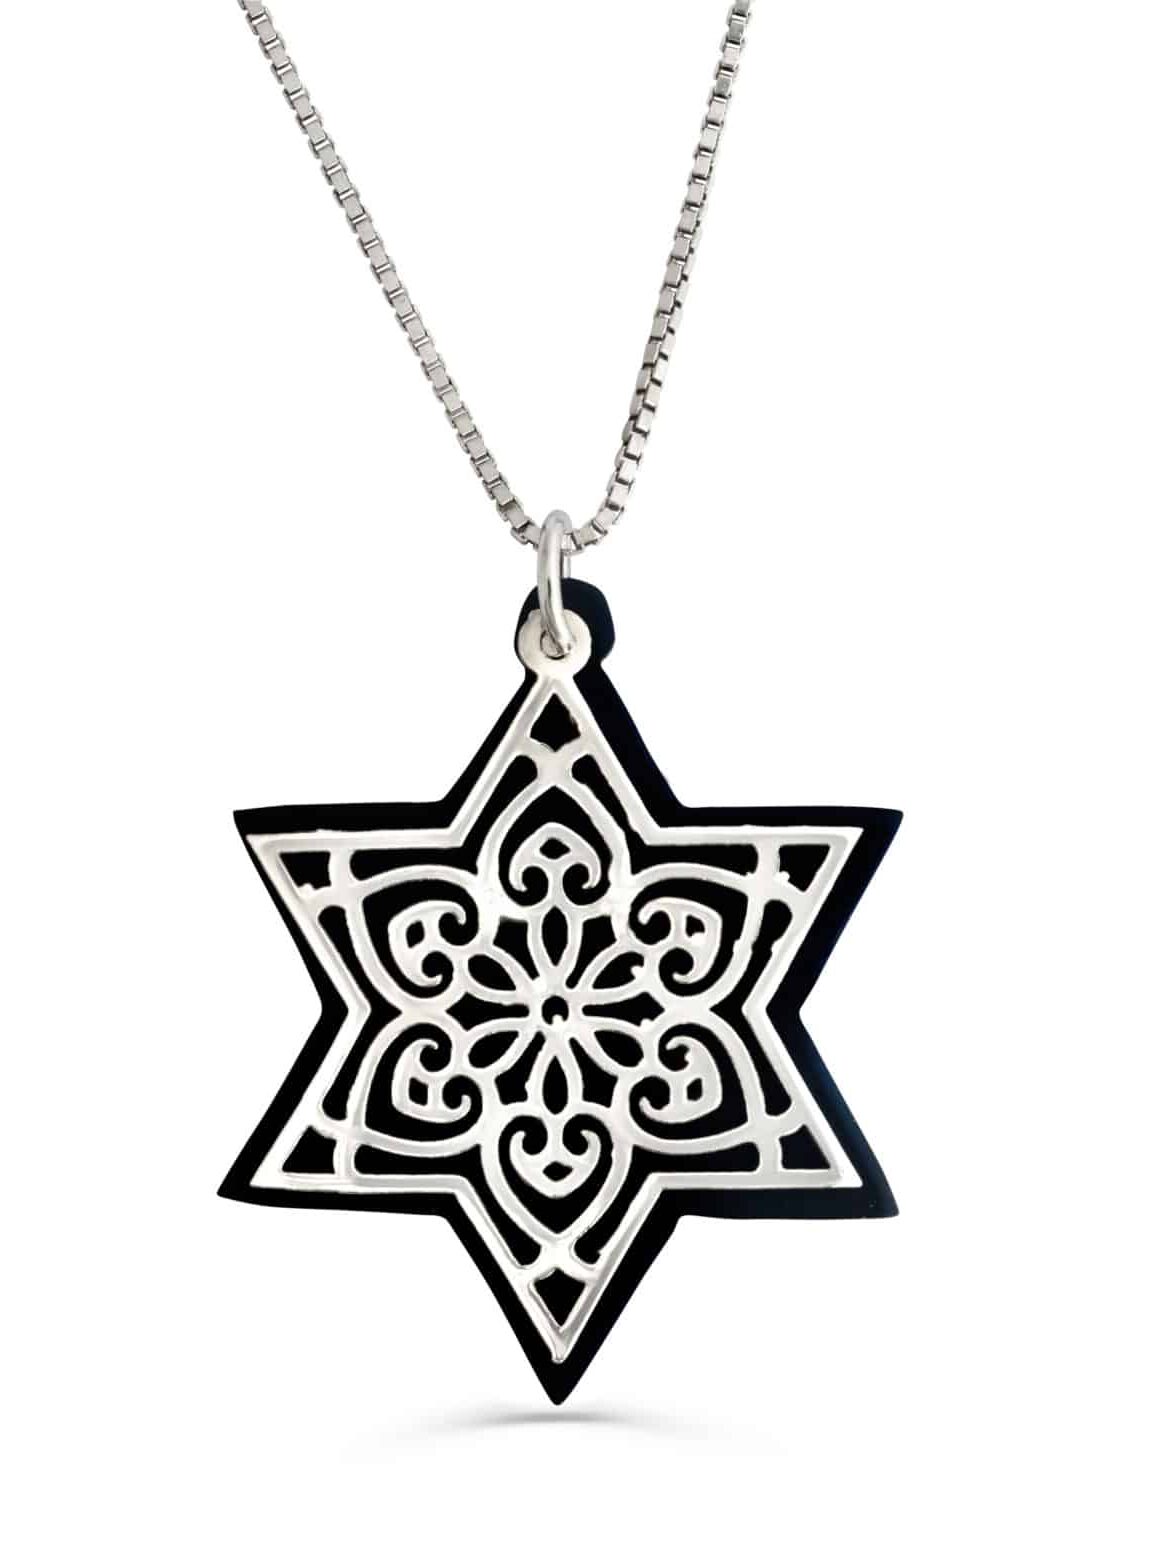 Aluminum and Silver Star of David Necklace